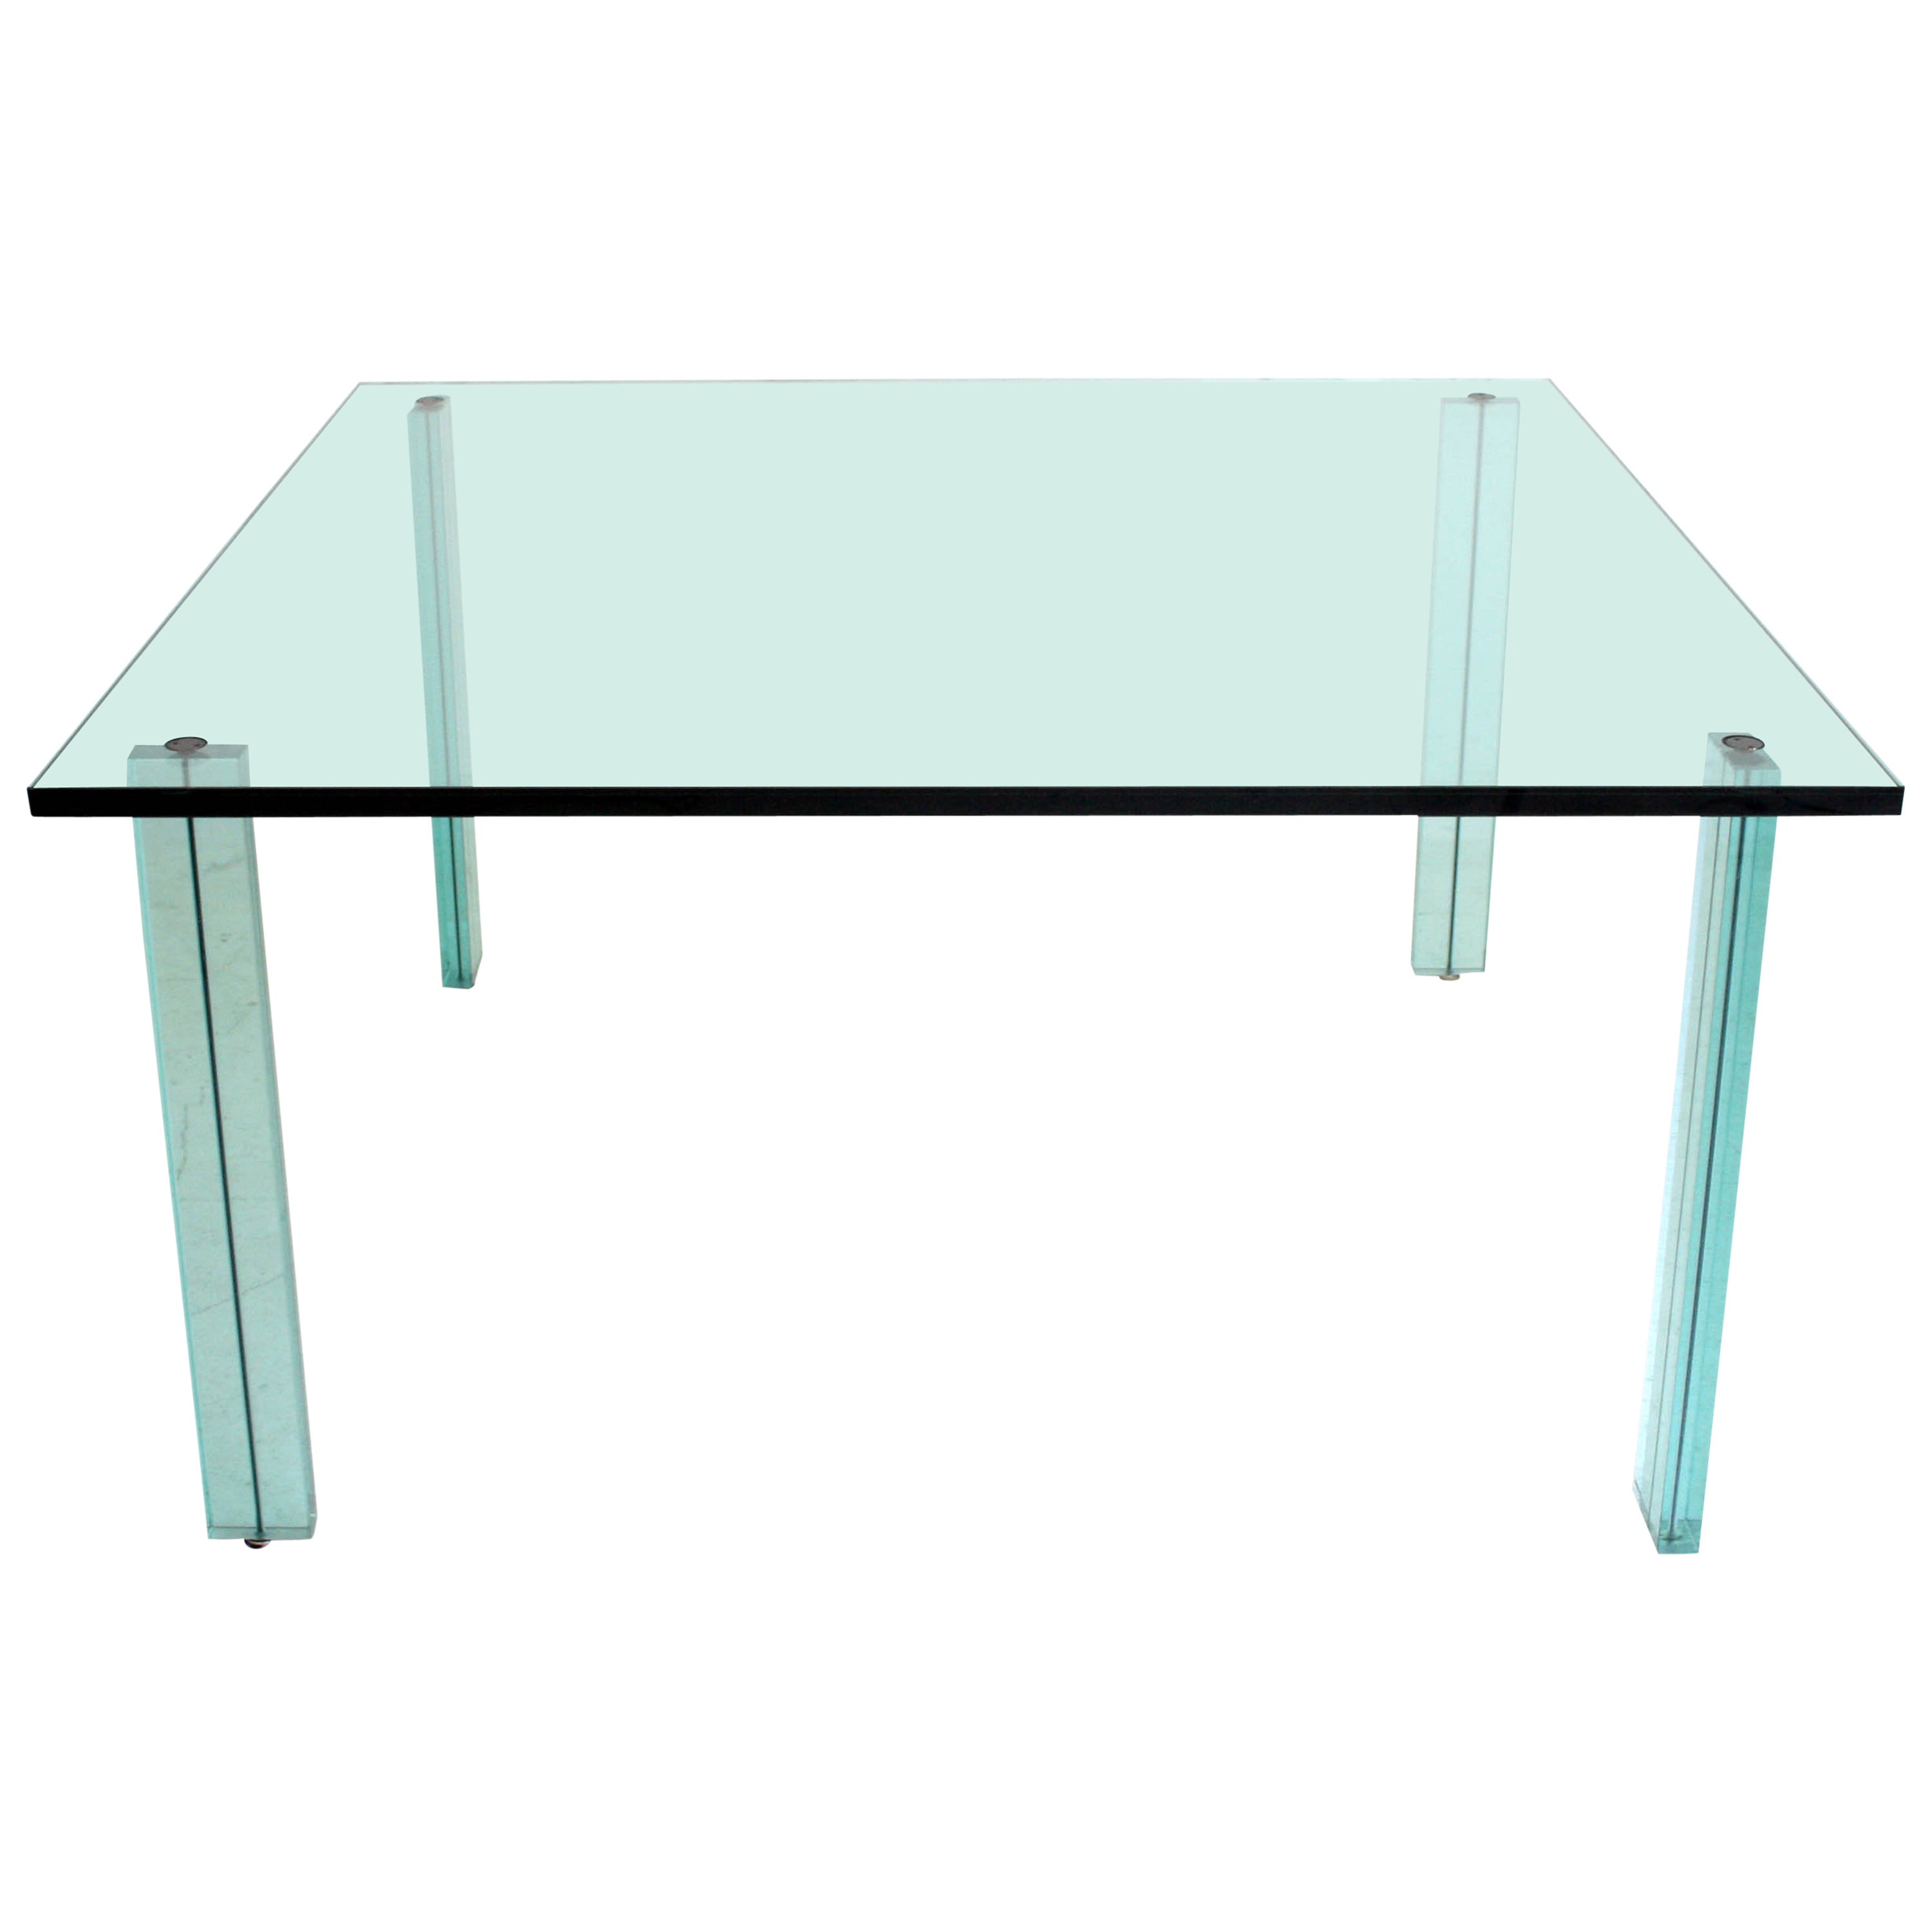 1986 Renzo Piano Teso Dining or Work Table for Fontana Arte Italy